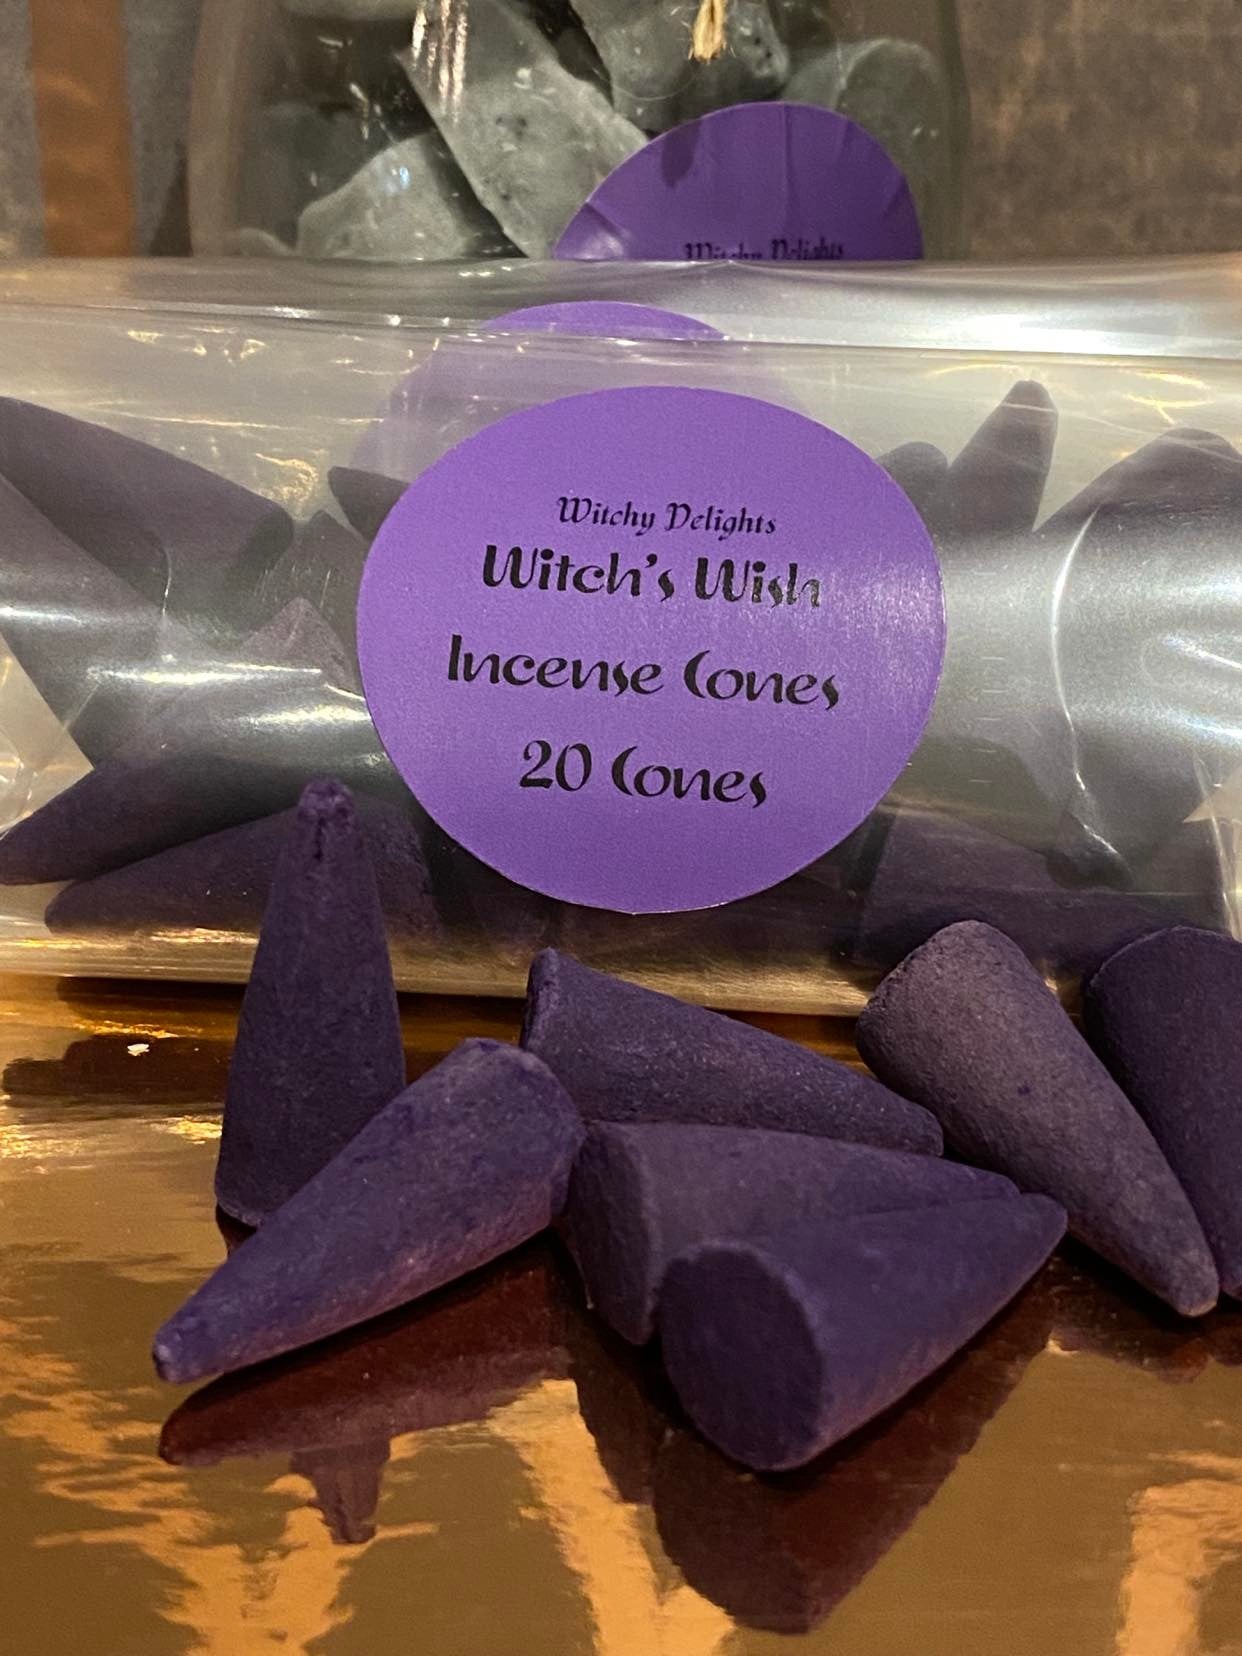 Incense Cones - Witch's Wish